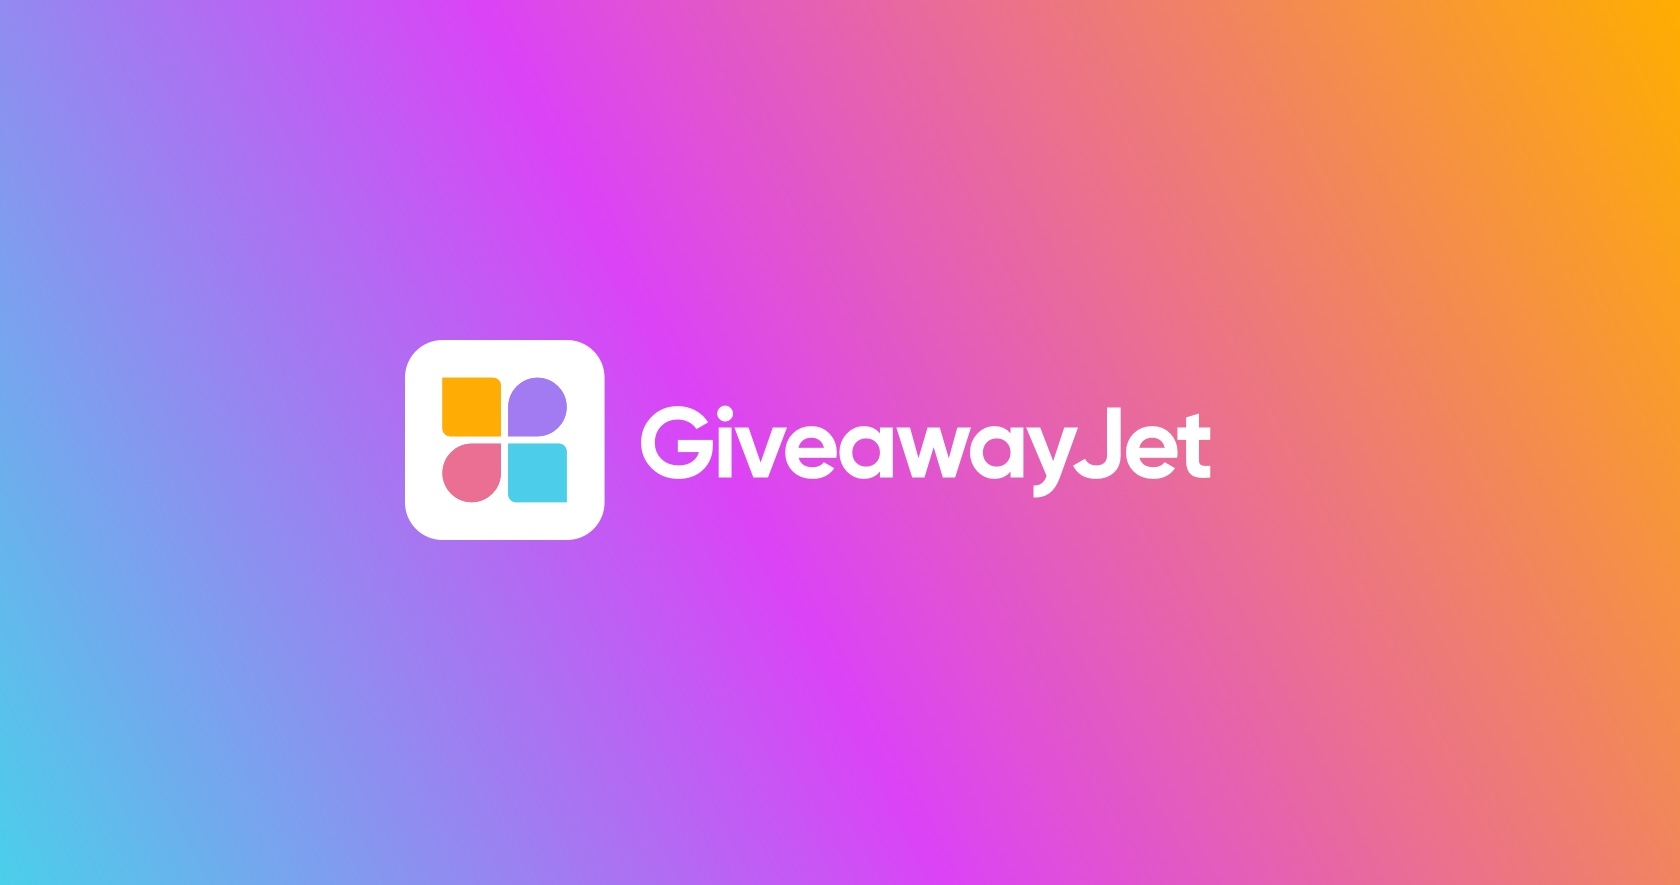 What is GiveawayJet?